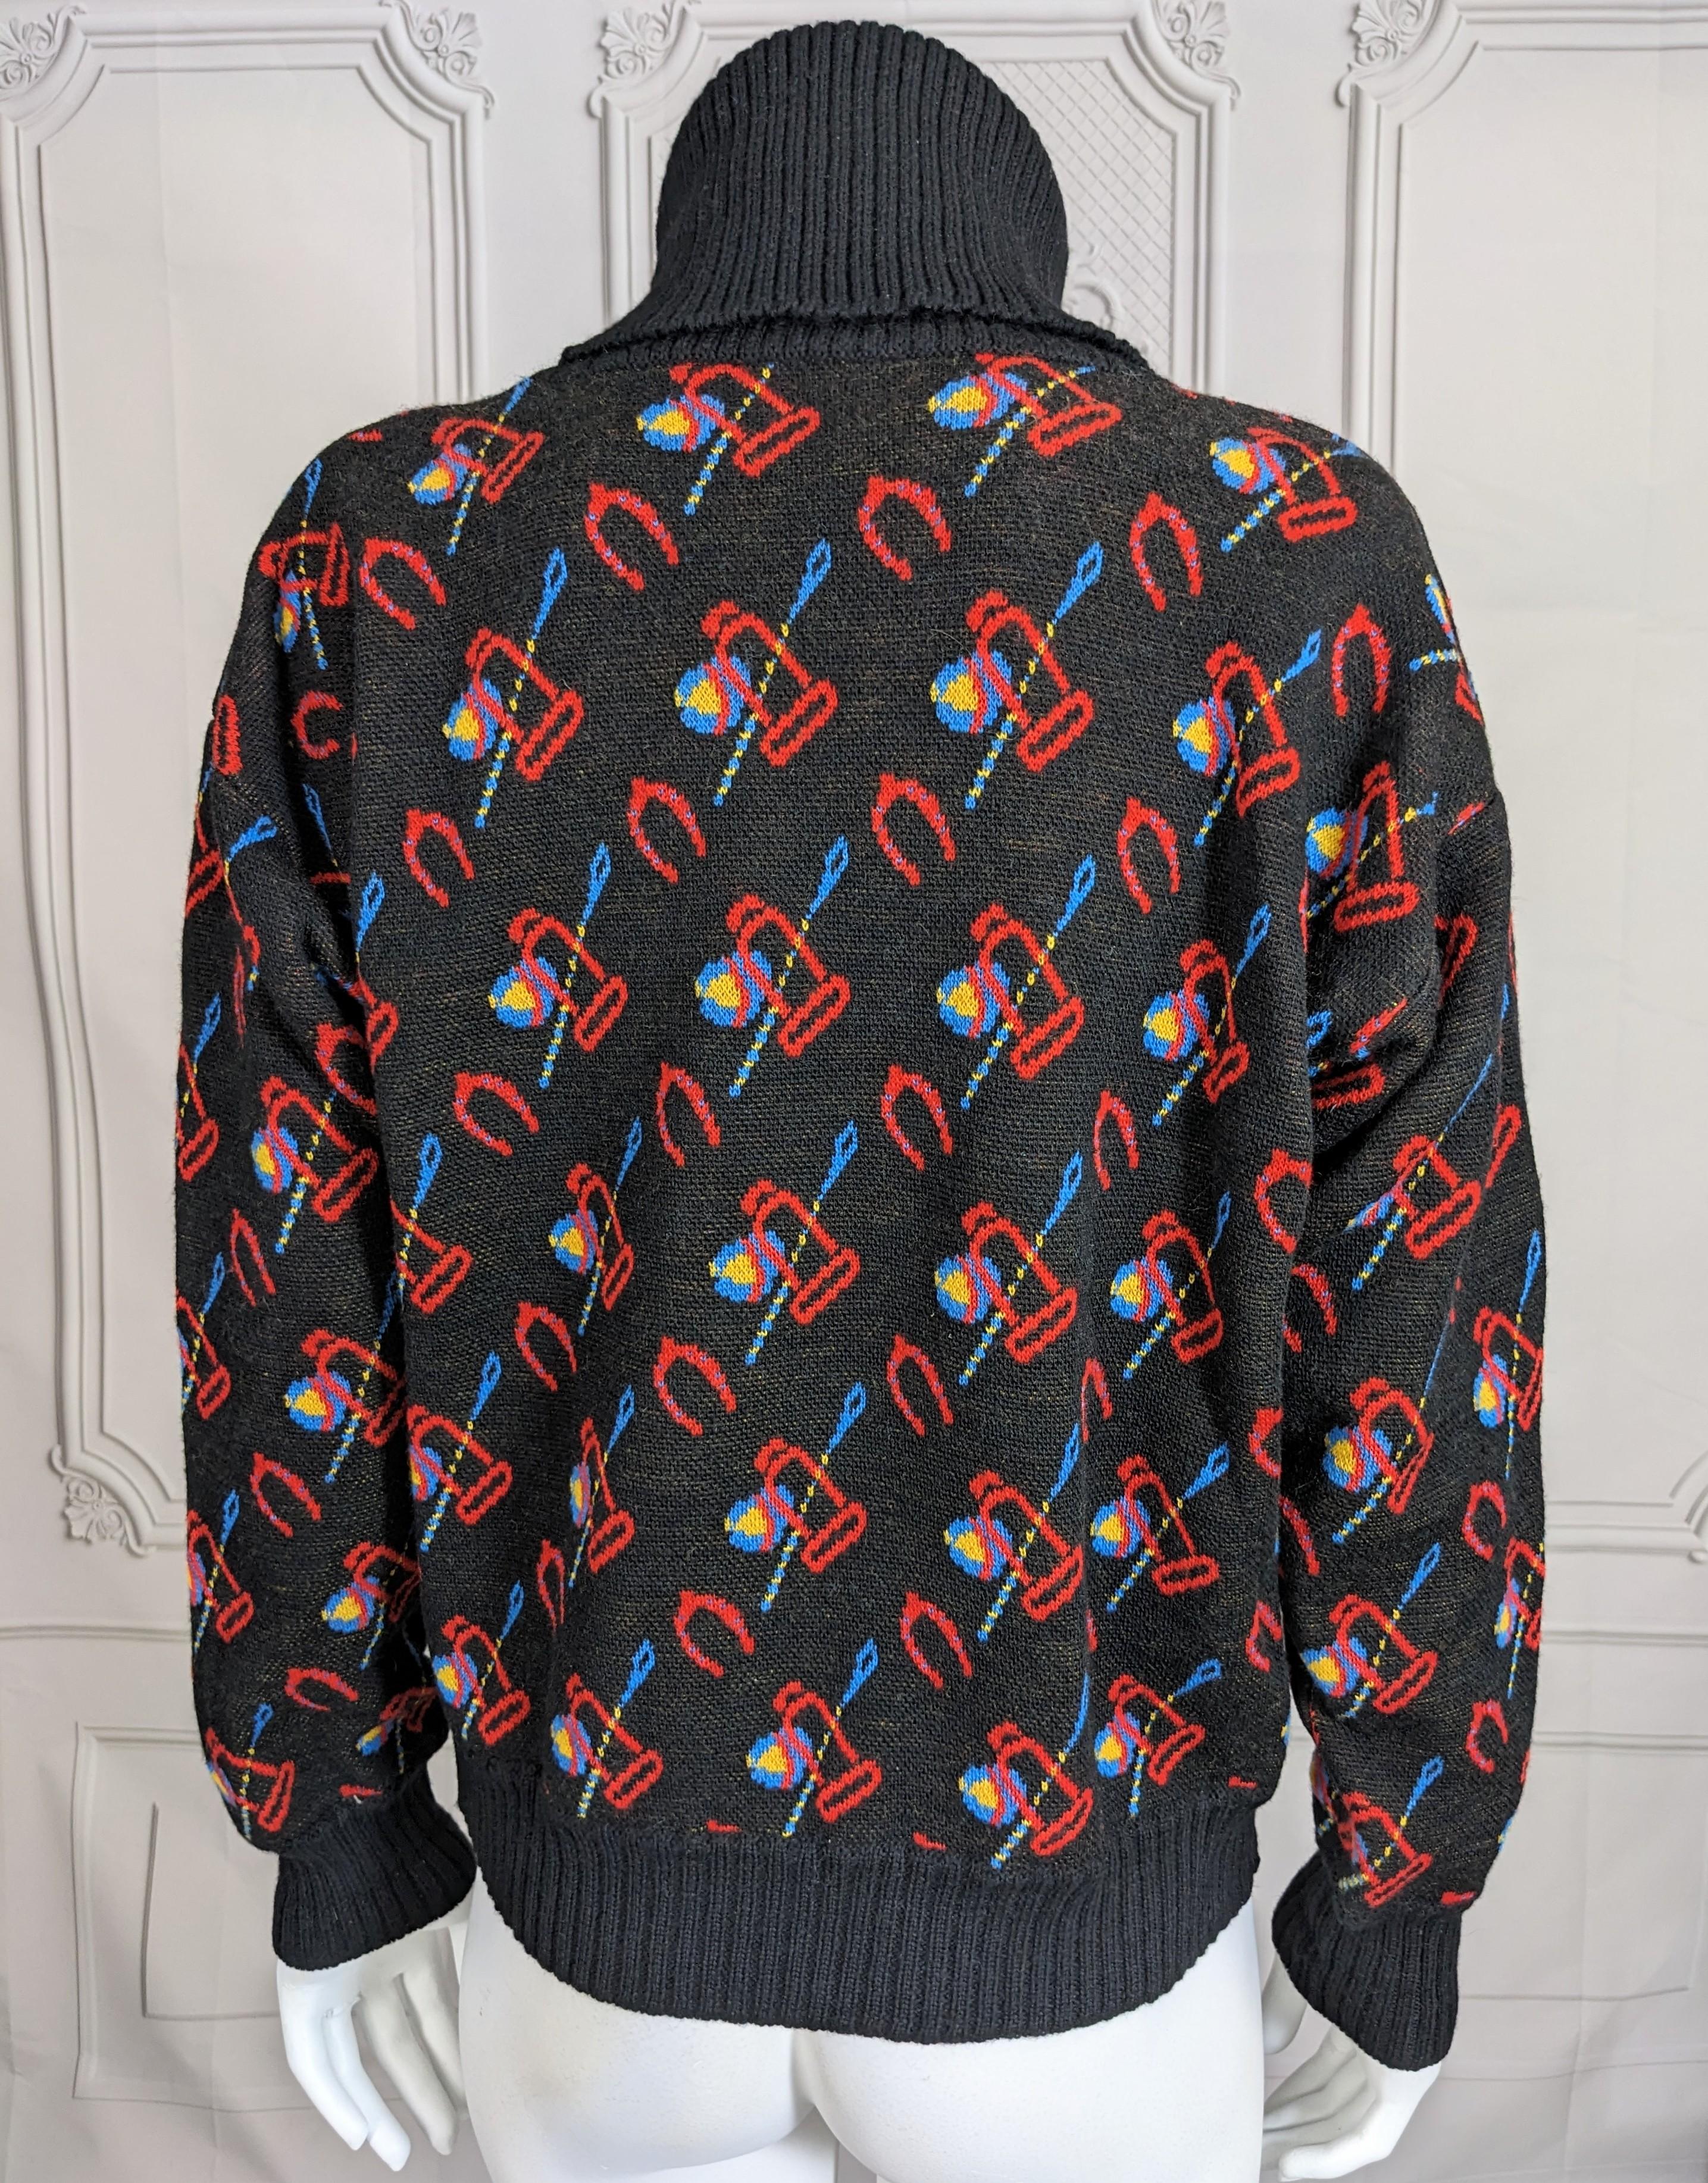 Charming Vintage Gucci Black Wool Sweater from the 1980's with bright inflected colorations of the period. High ribbed turtleneck with deep sleeves and body intarsia knit with bright riding crop and stirrup motifs. Very reminiscent of fun, playful